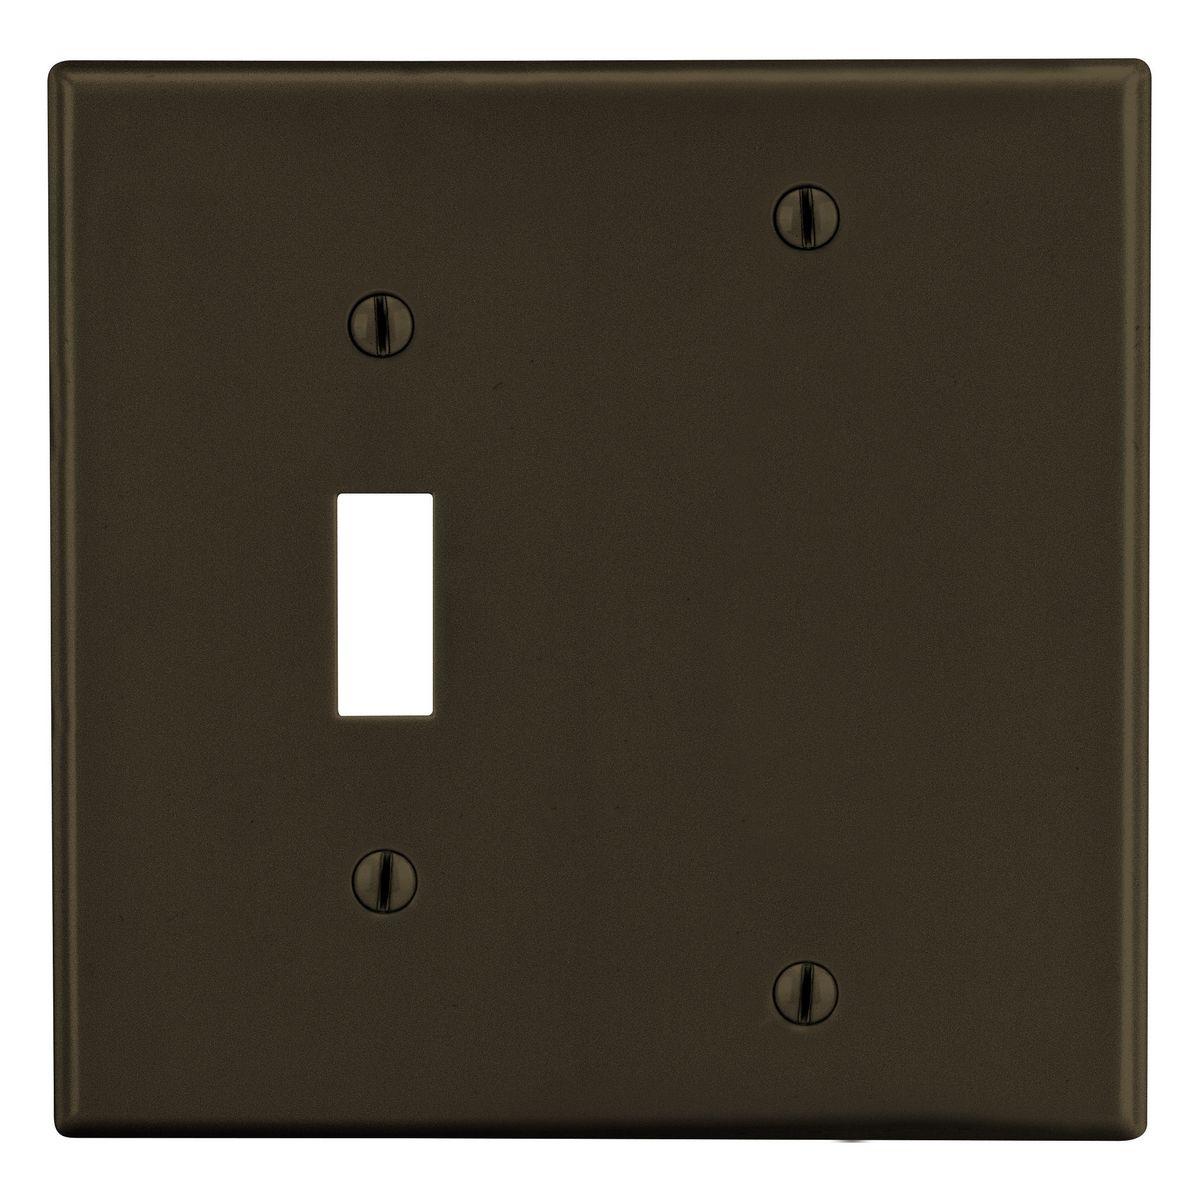 Hubbell PJ113 Wallplate, Mid-Size 2-Gang, 1) Toggle 1) Box Mount Blank, Brown  ; High-impact, self-extinguishing polycarbonate material ; More Rigid ; Sharp lines and less dimpling ; Smooth satin finish ; Blends into wall with an optimum finish ; Smooth Satin Finish